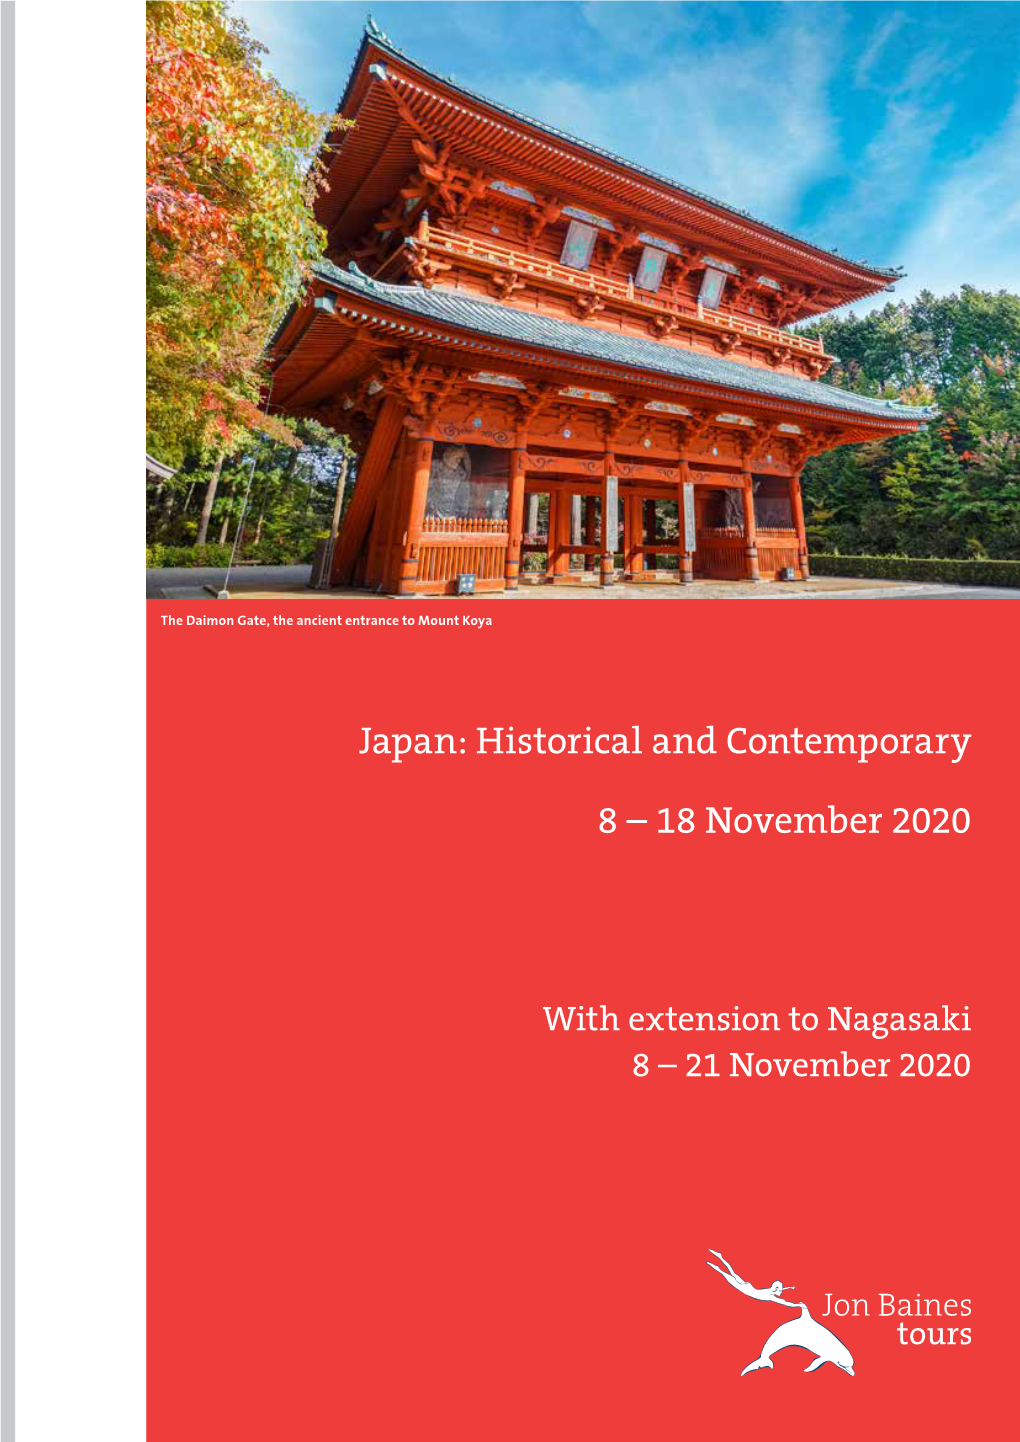 Japan: Historical and Contemporary